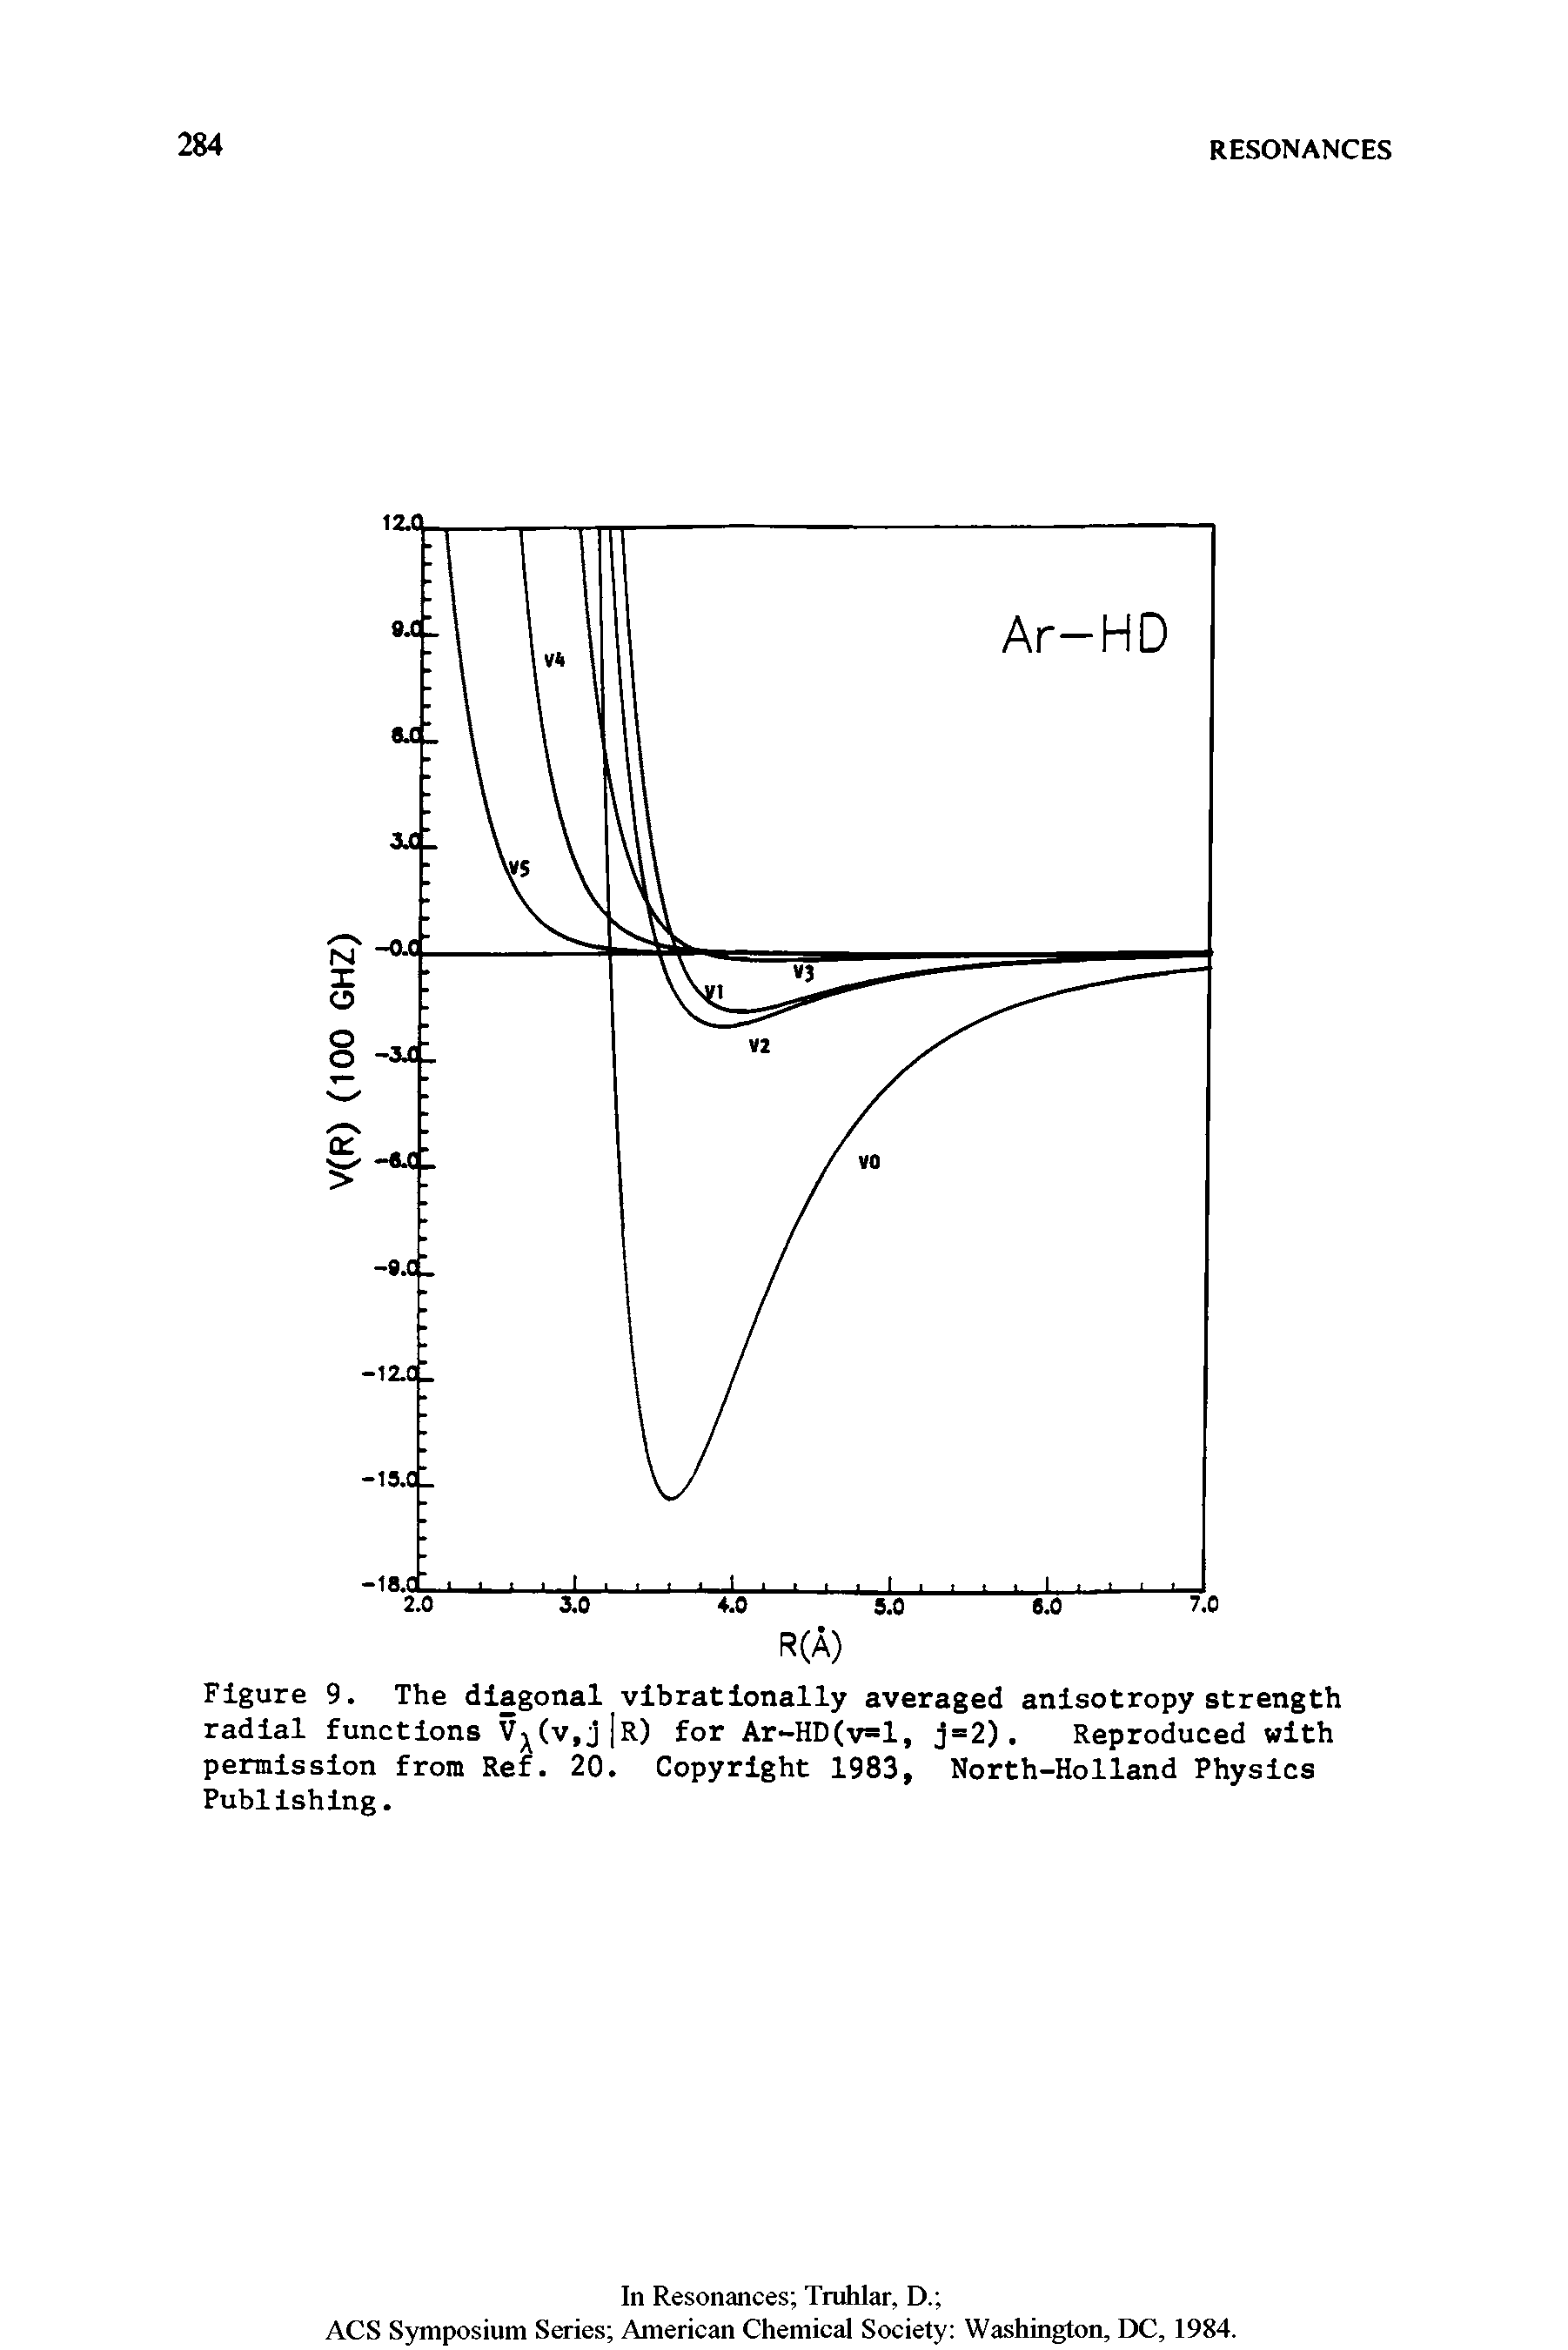 Figure 9. The diagonal vibrationally averaged anisotropy strength radial functions Vj (v,j r) for Ar-HD(v l, j=2). Reproduced with permission from Ref. 20. Copyright 1983, North-Holland Physics Publishing.